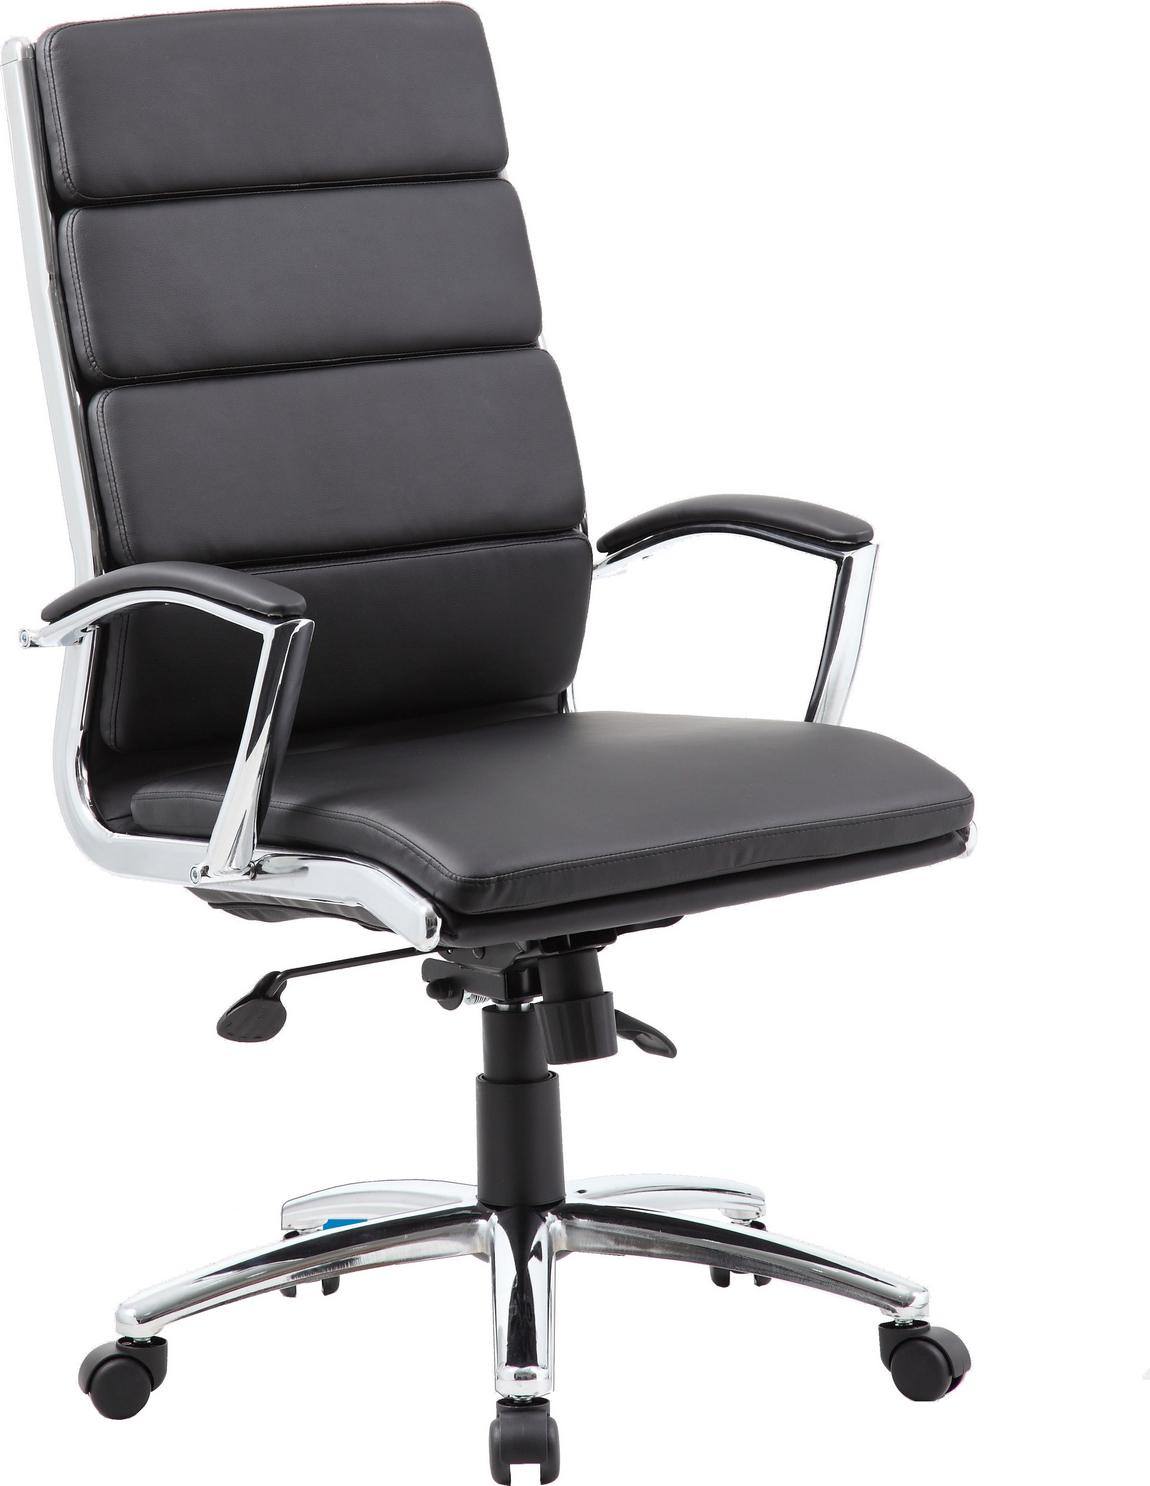 885 Modern Black Conference Room Chair 1 